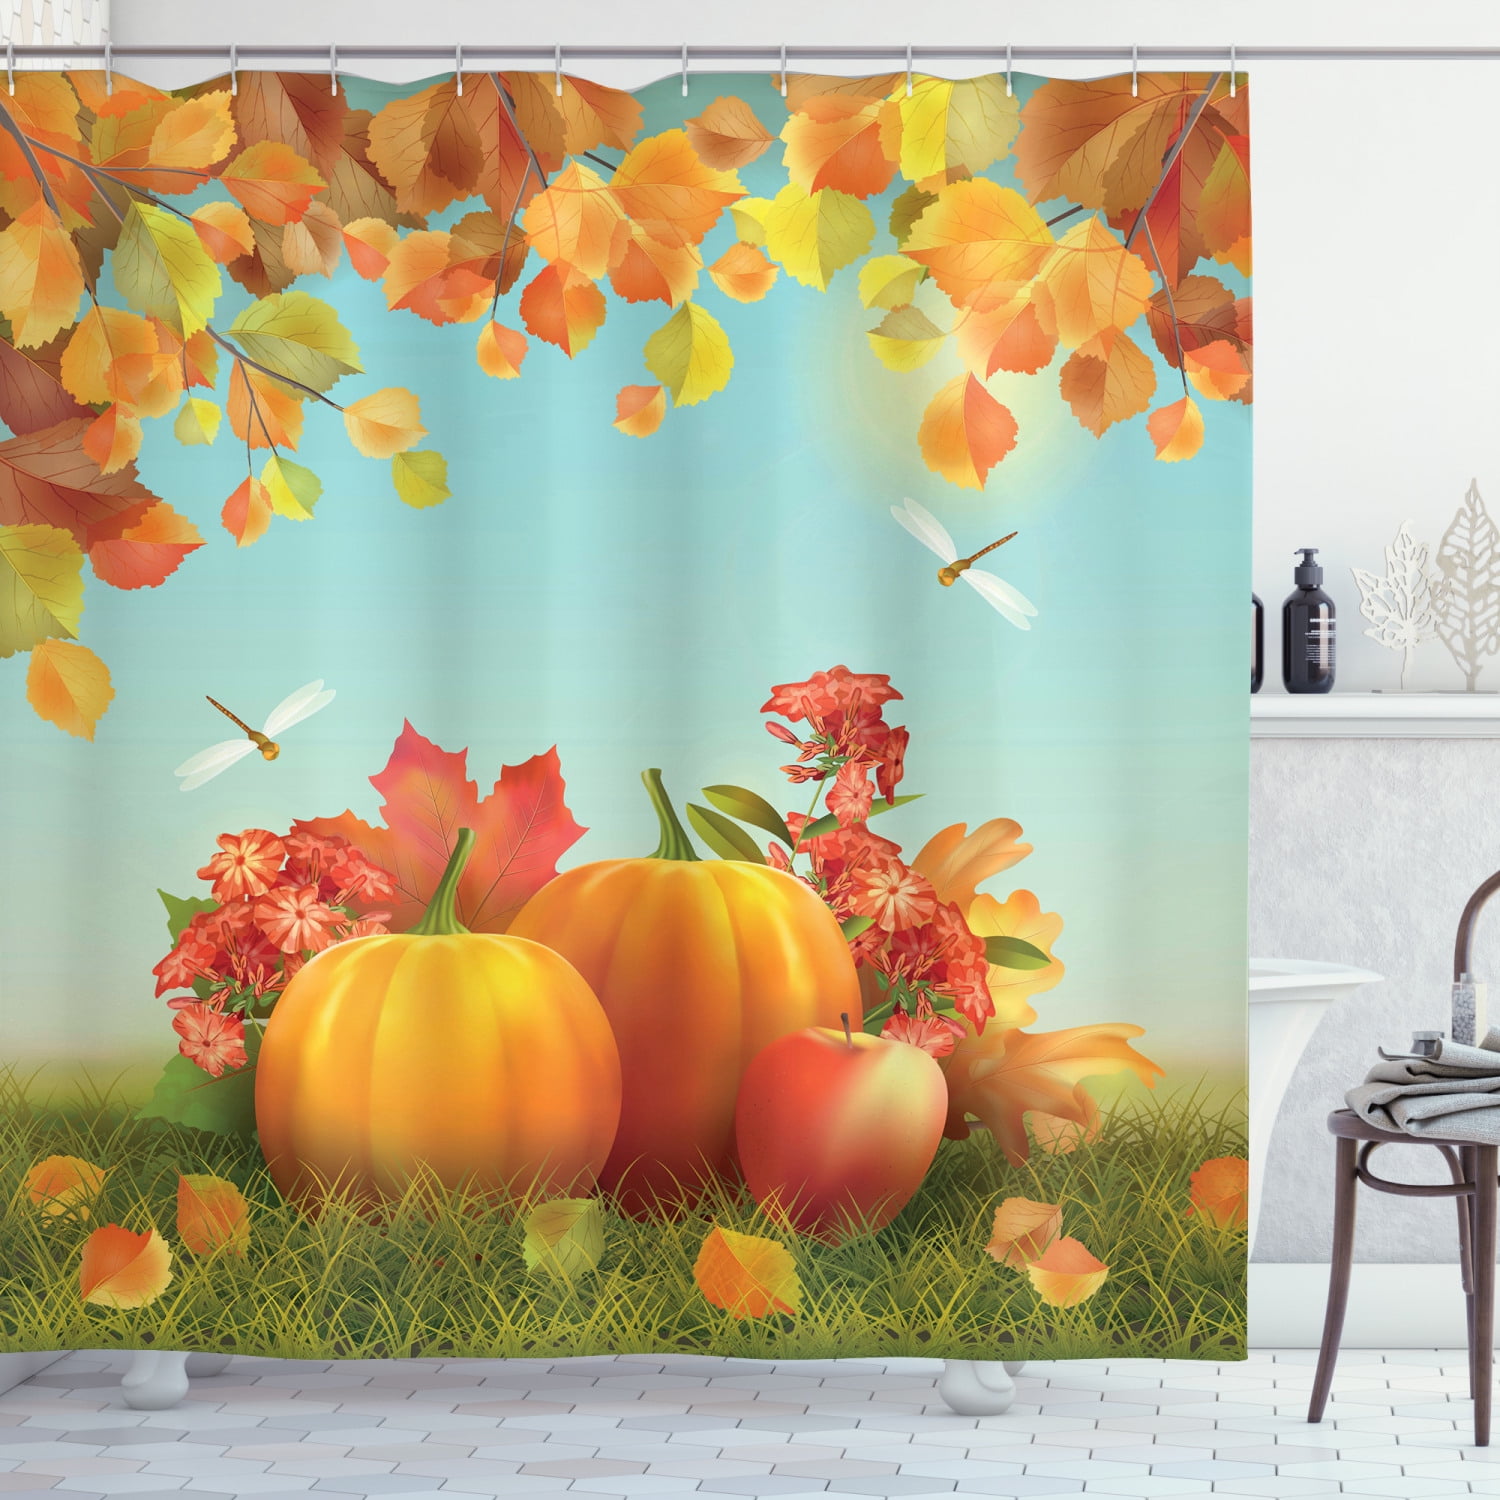 Happy Thanksgiving Day Autumn Leaves Holly Fruit Pumpkin Shower Curtain Hook Mat 